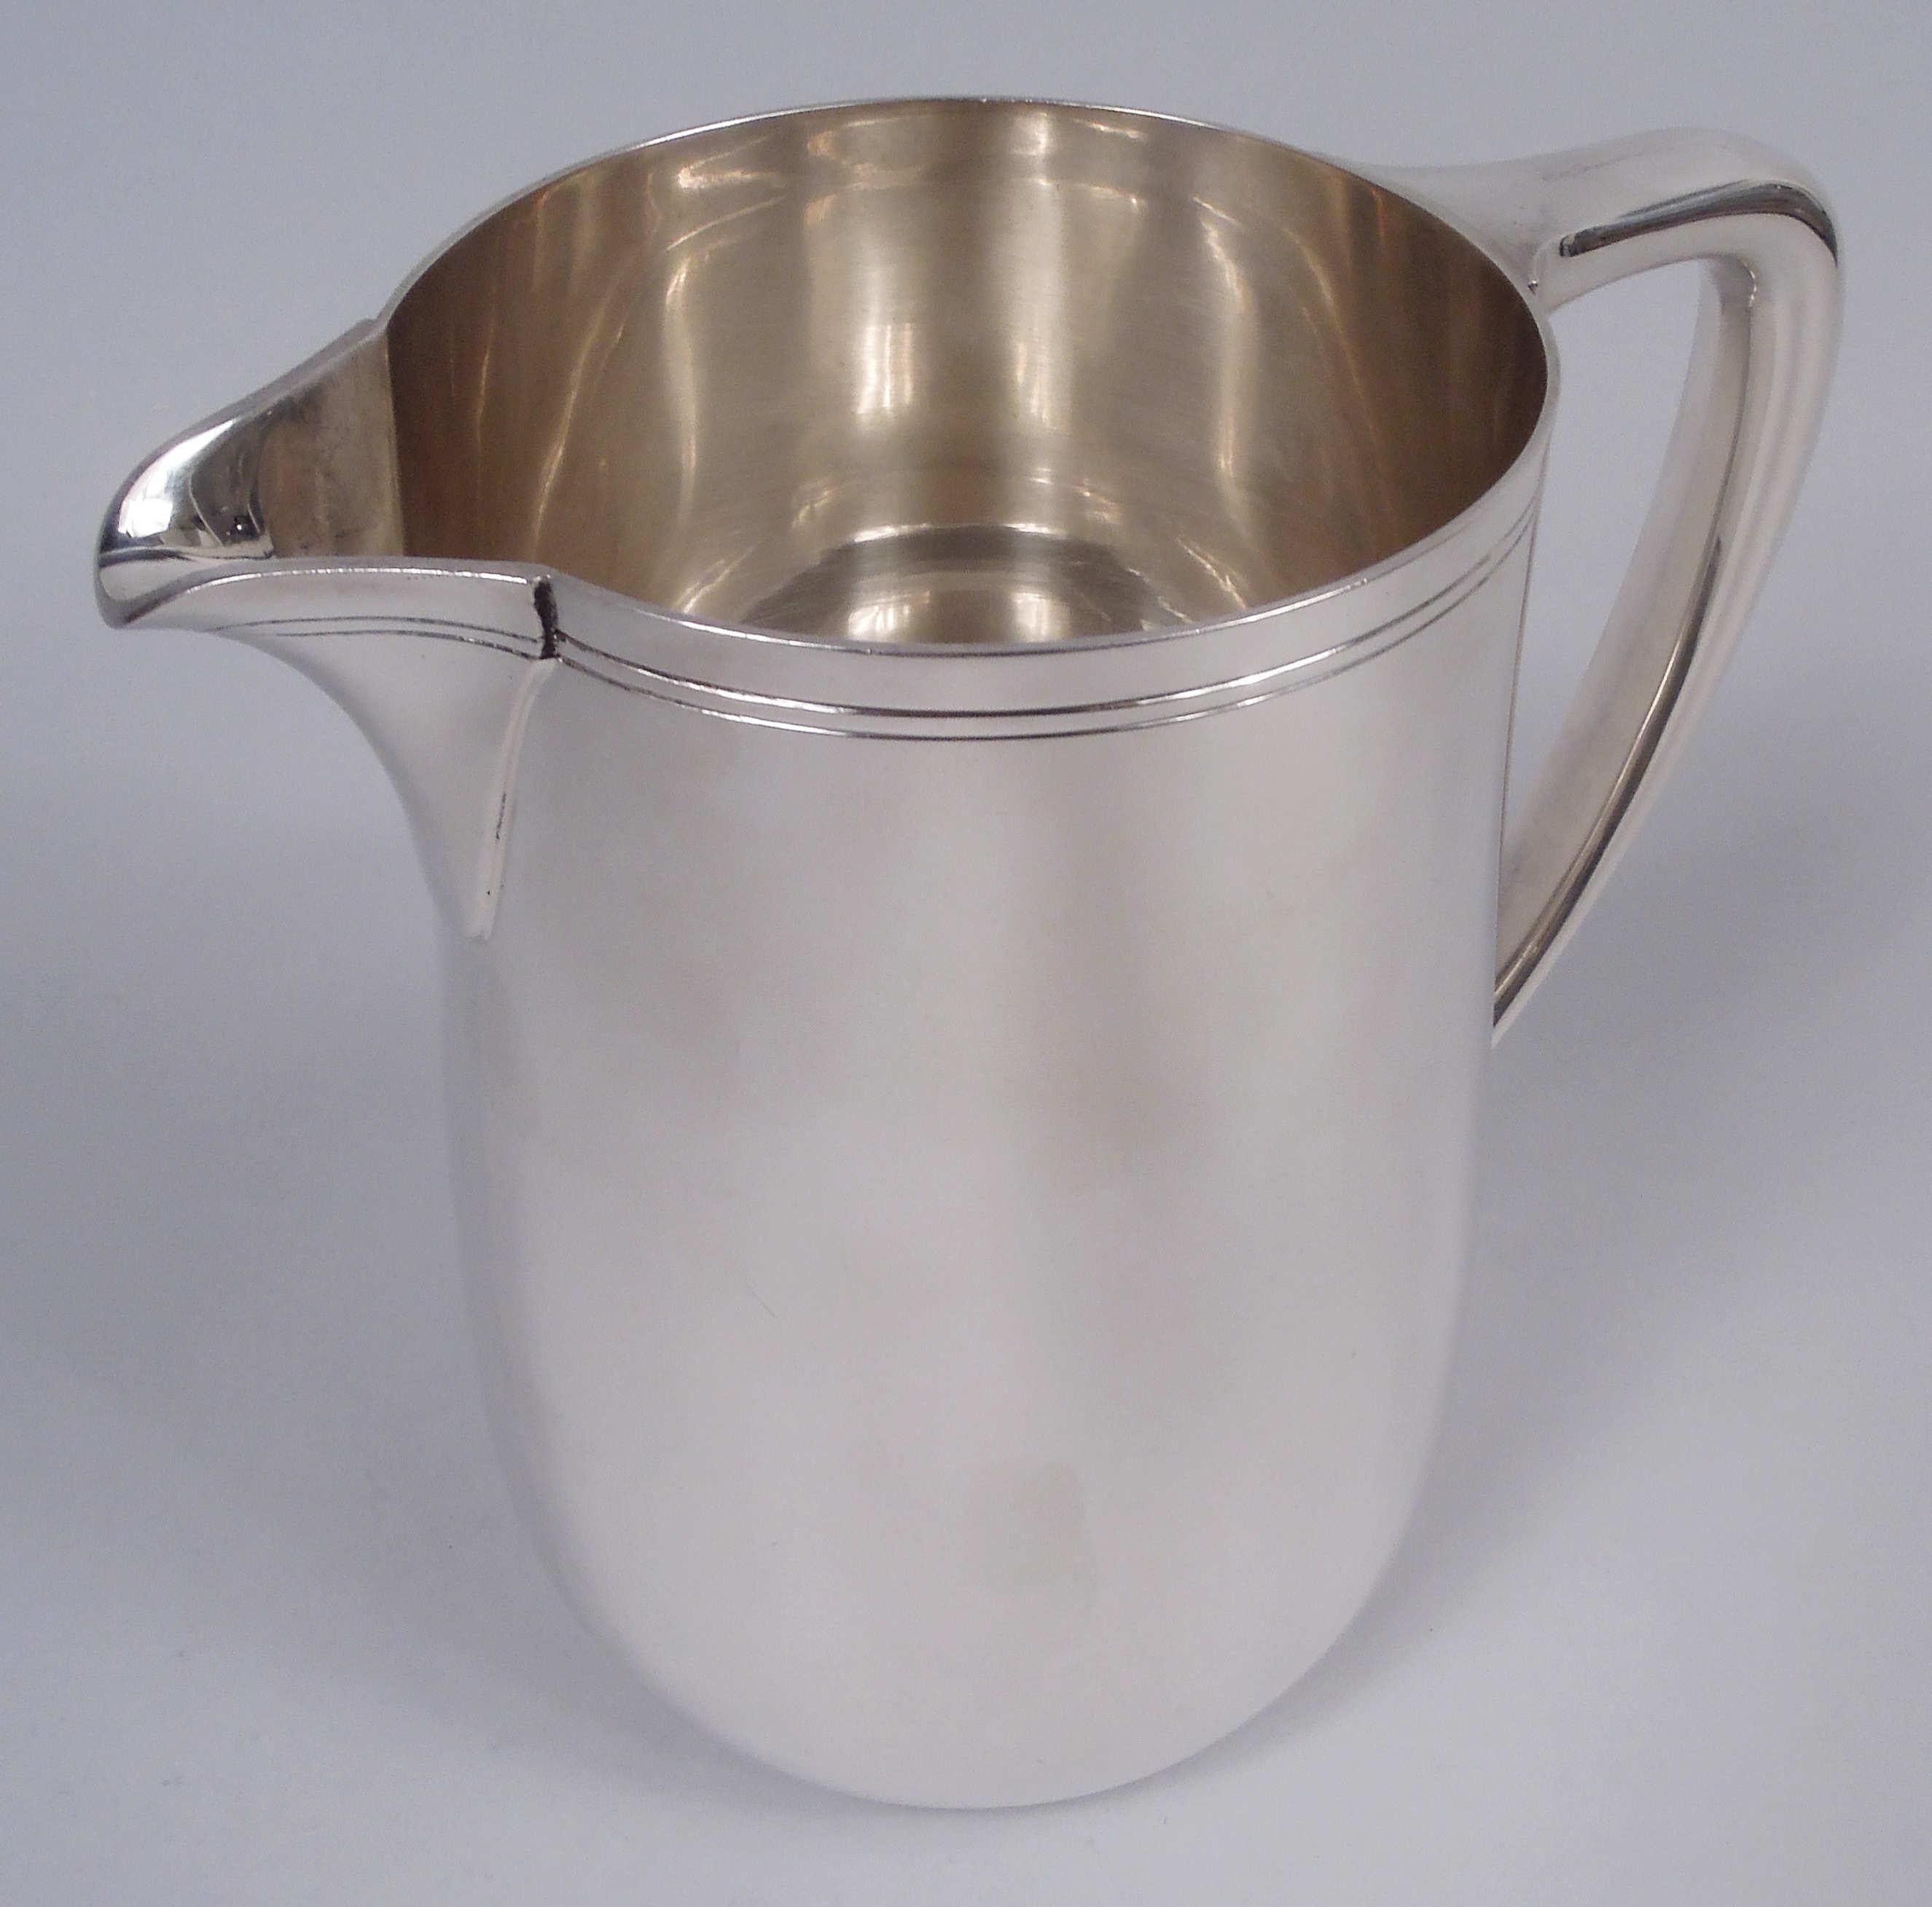 Modern sterling silver water pitcher. Made by Tiffany & Co. in New York. Upward tapering sides, scrolled bracket handle, and v-spout. Spare incised banding near rim. Holds 3 1/2 pints. Fully marked including maker’s stamp, pattern no. 22343, and